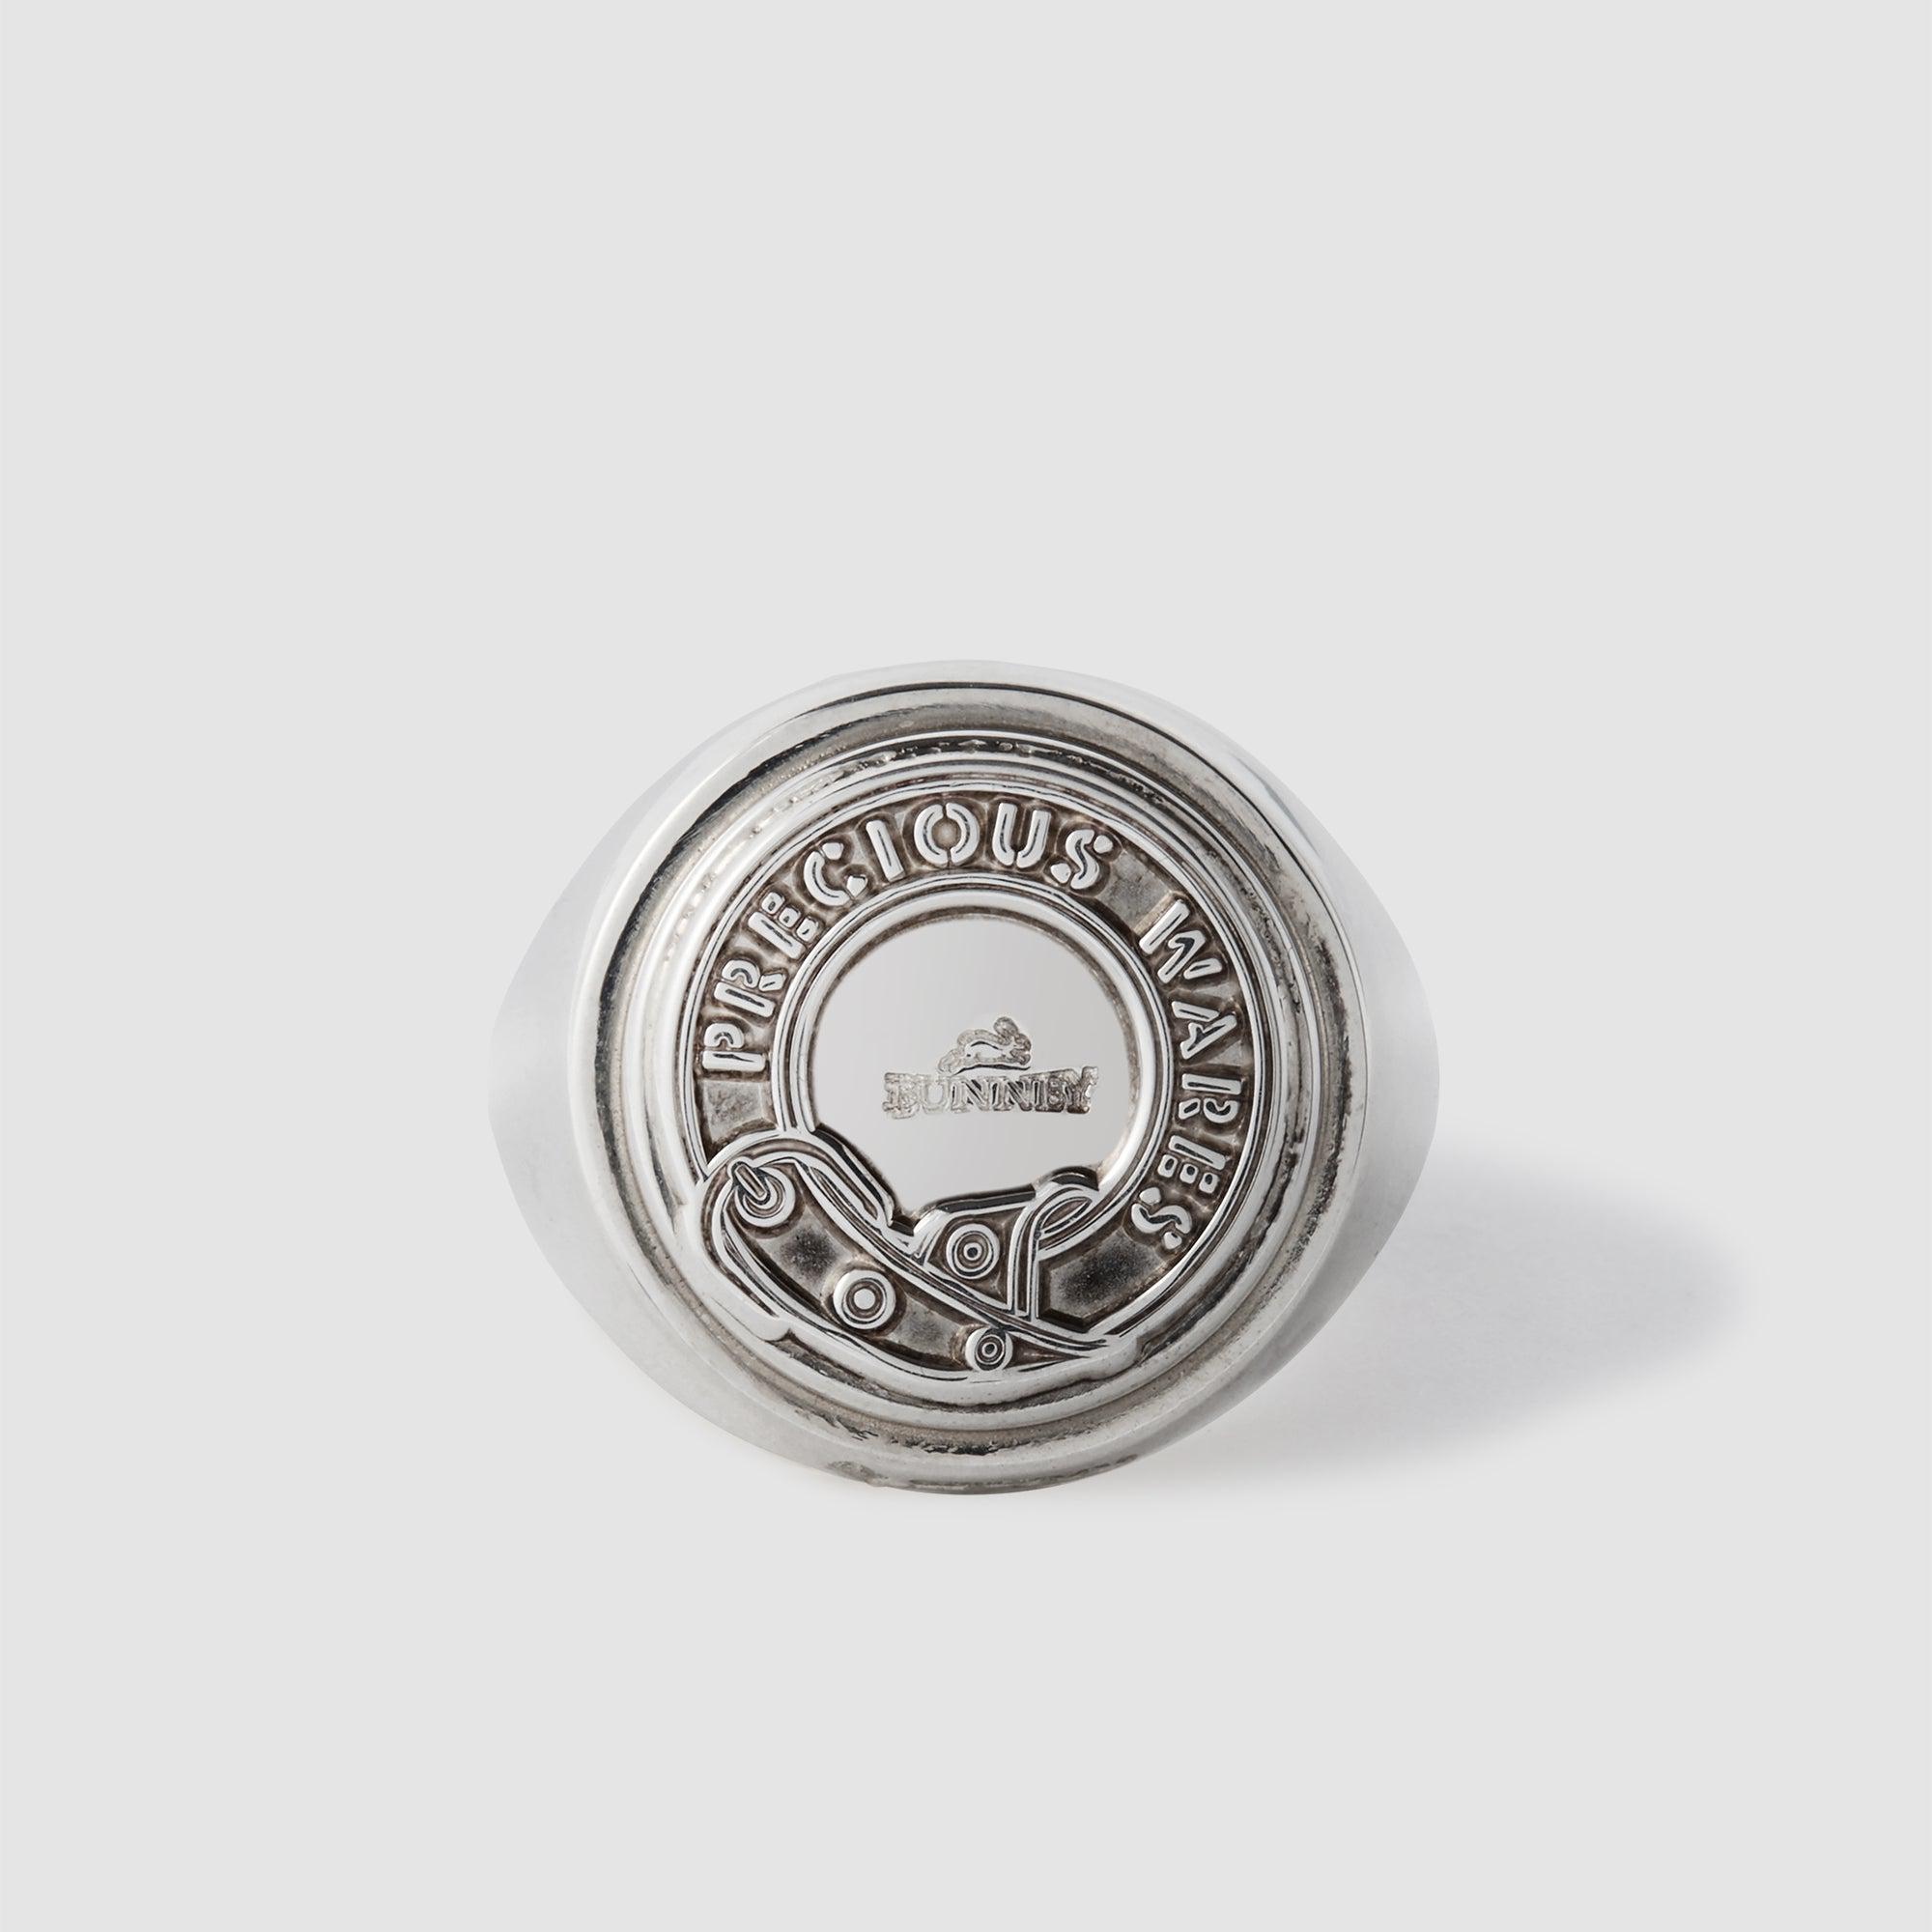 Bunney Precious Wares Heavy Signet Ring (Sterling Silver) by ANDREW BUNNEY